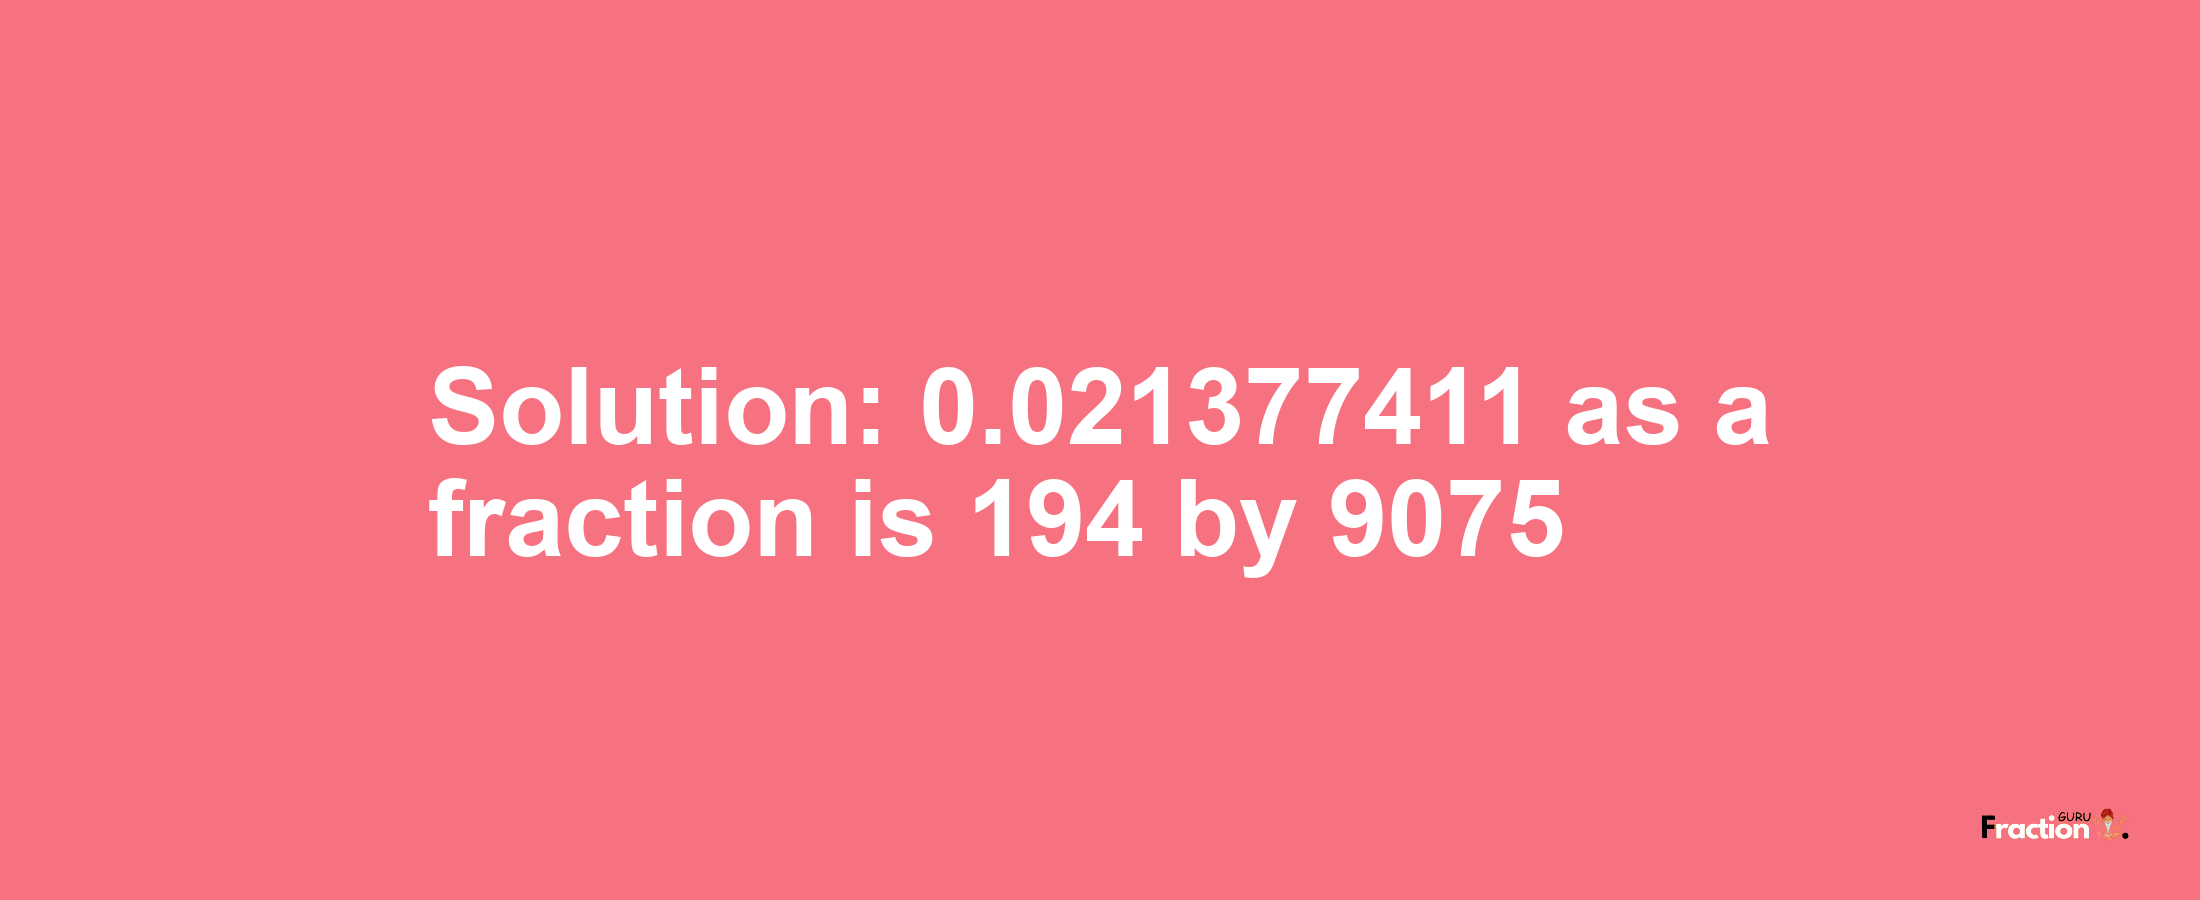 Solution:0.021377411 as a fraction is 194/9075